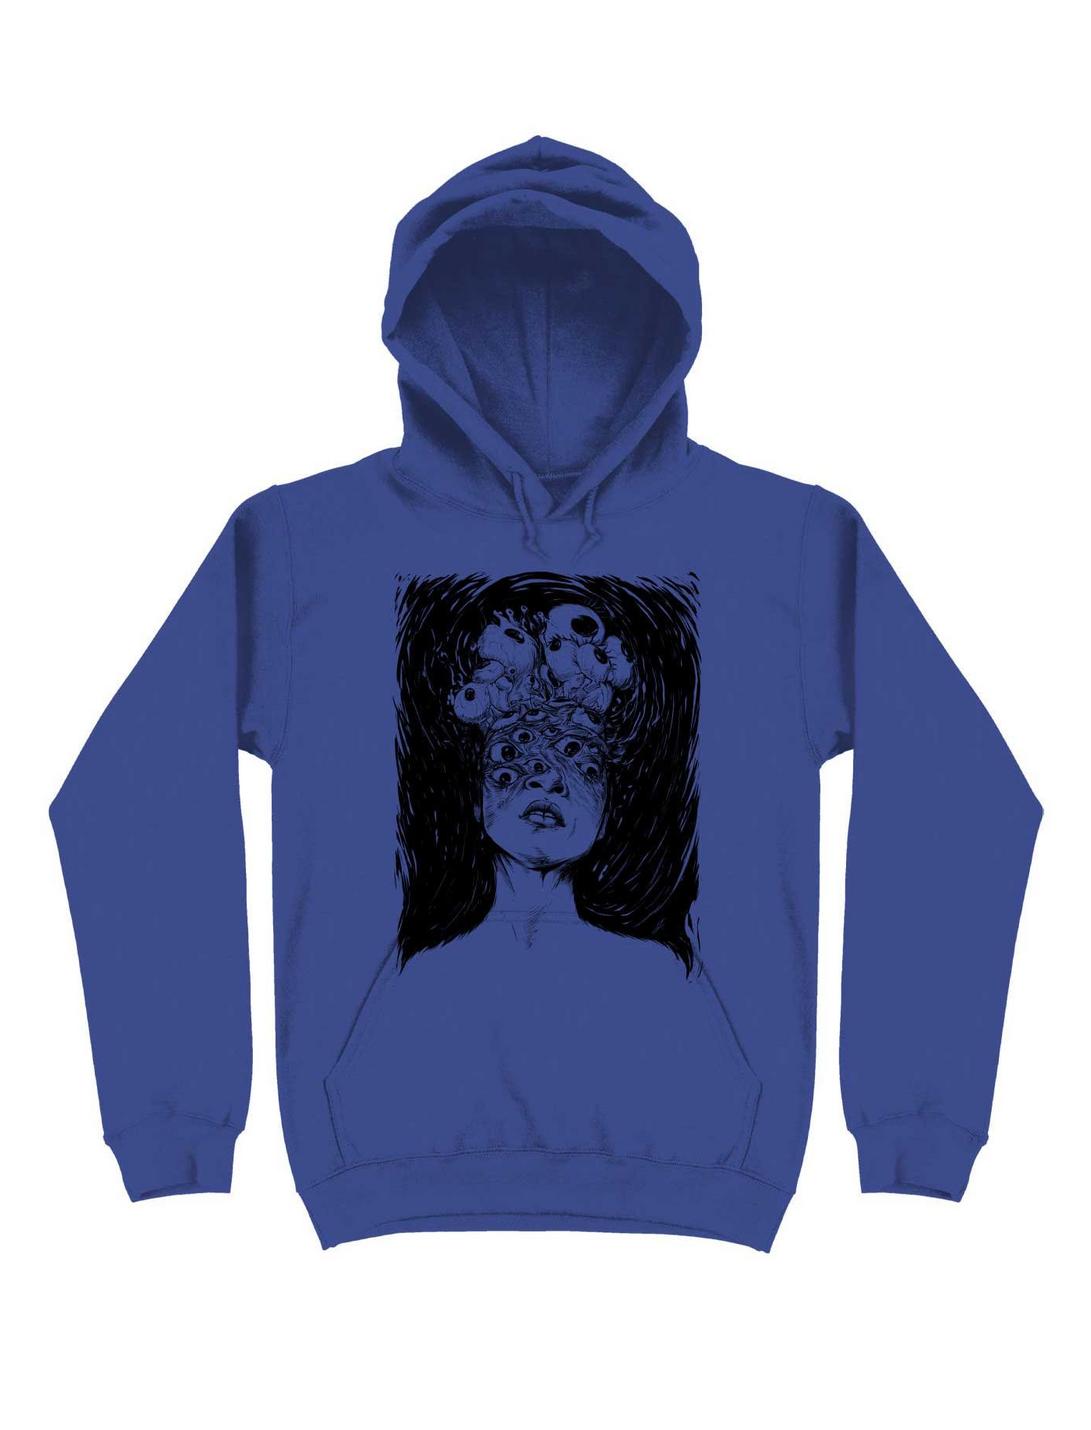 Black History Month Worst Creations The Witnesser Hoodie, ROYAL, hi-res